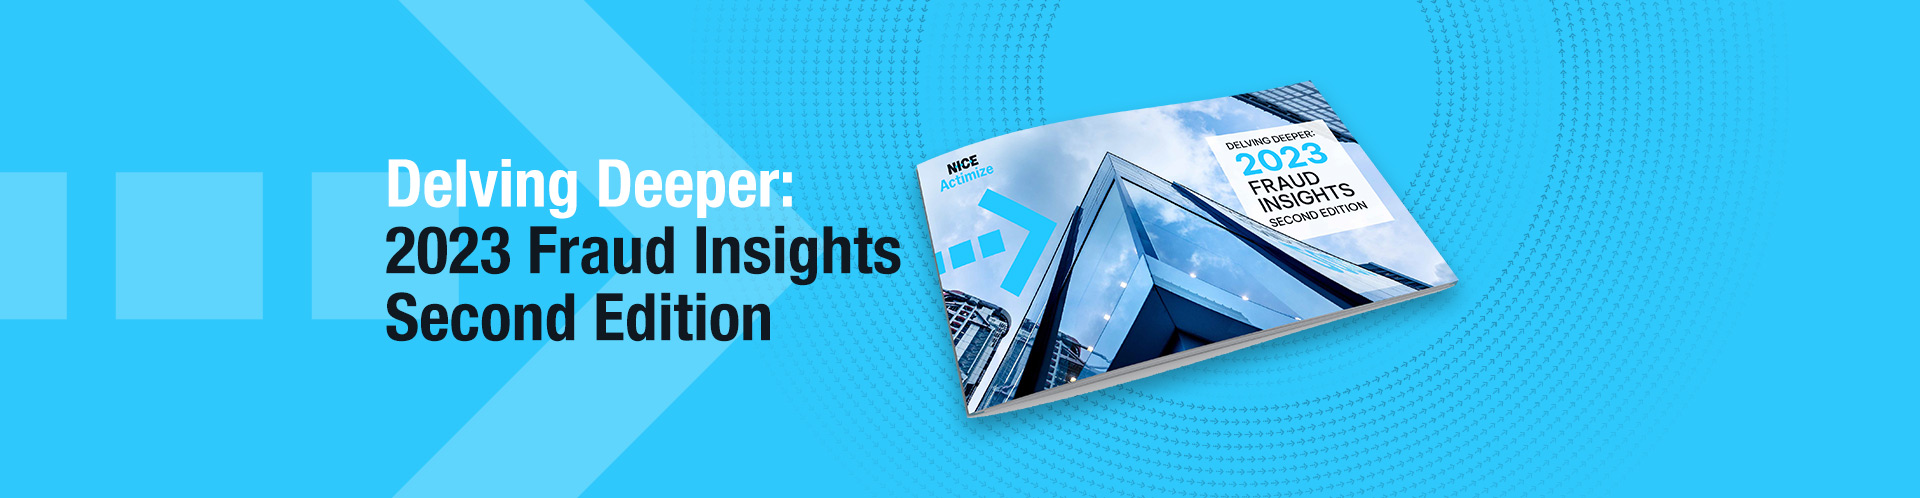 Delving Deeper: The 2023 Fraud Insights, Second Edition. Know more. Risk less.